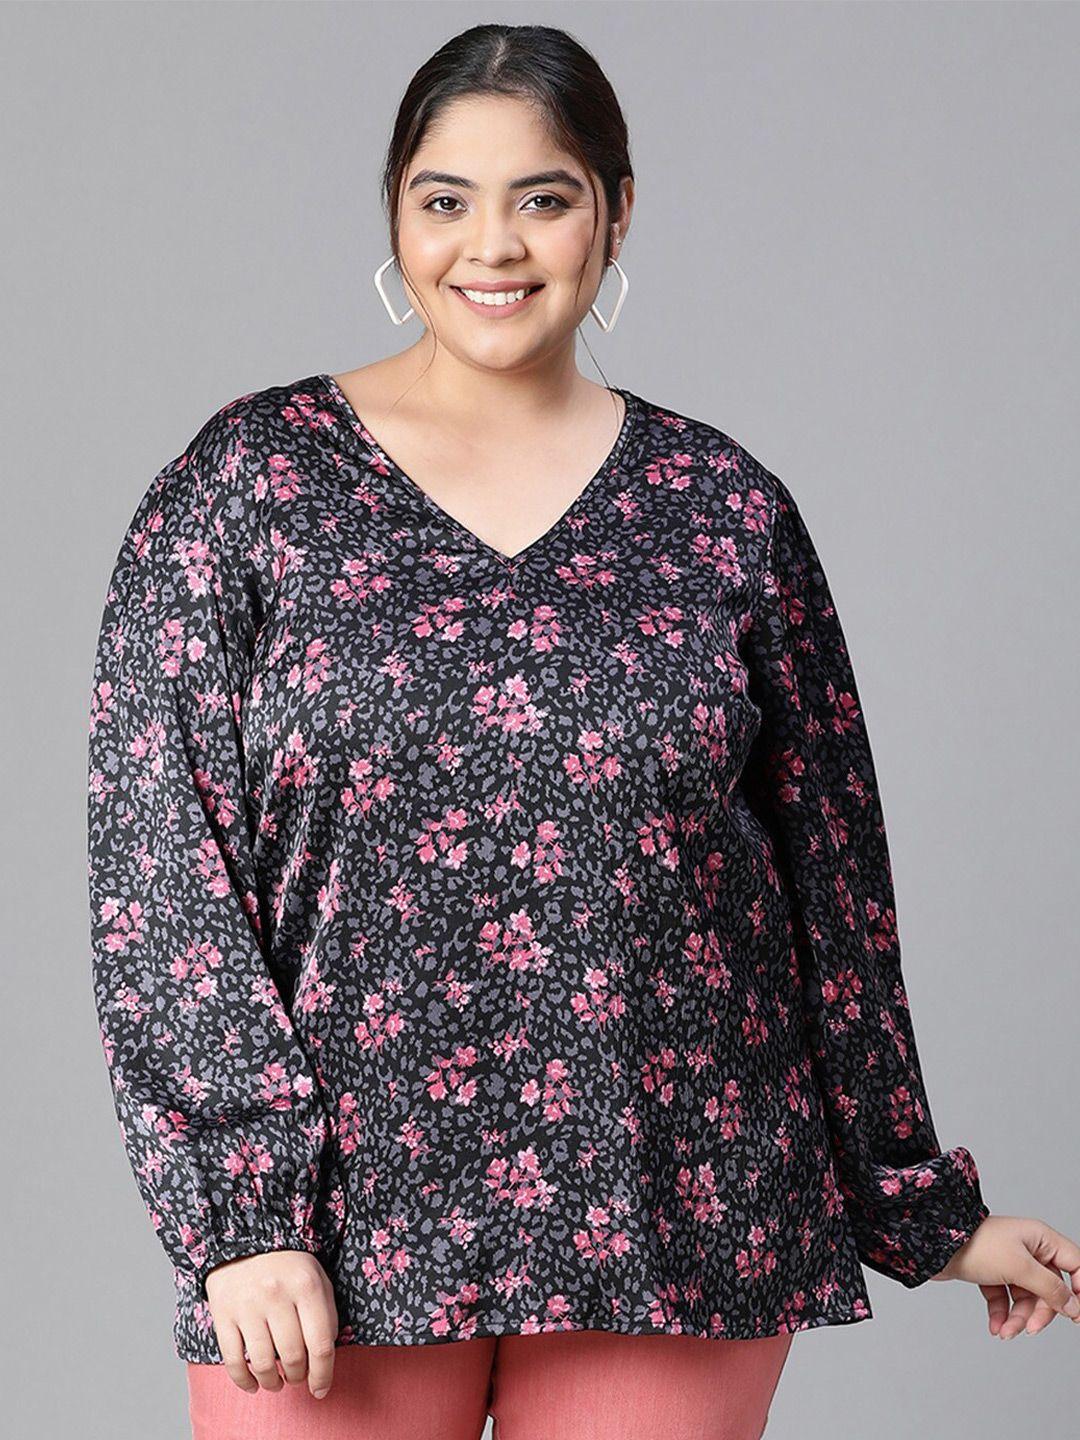 oxolloxo-plus-size-floral-printed-v-neck-puff-sleeve-top